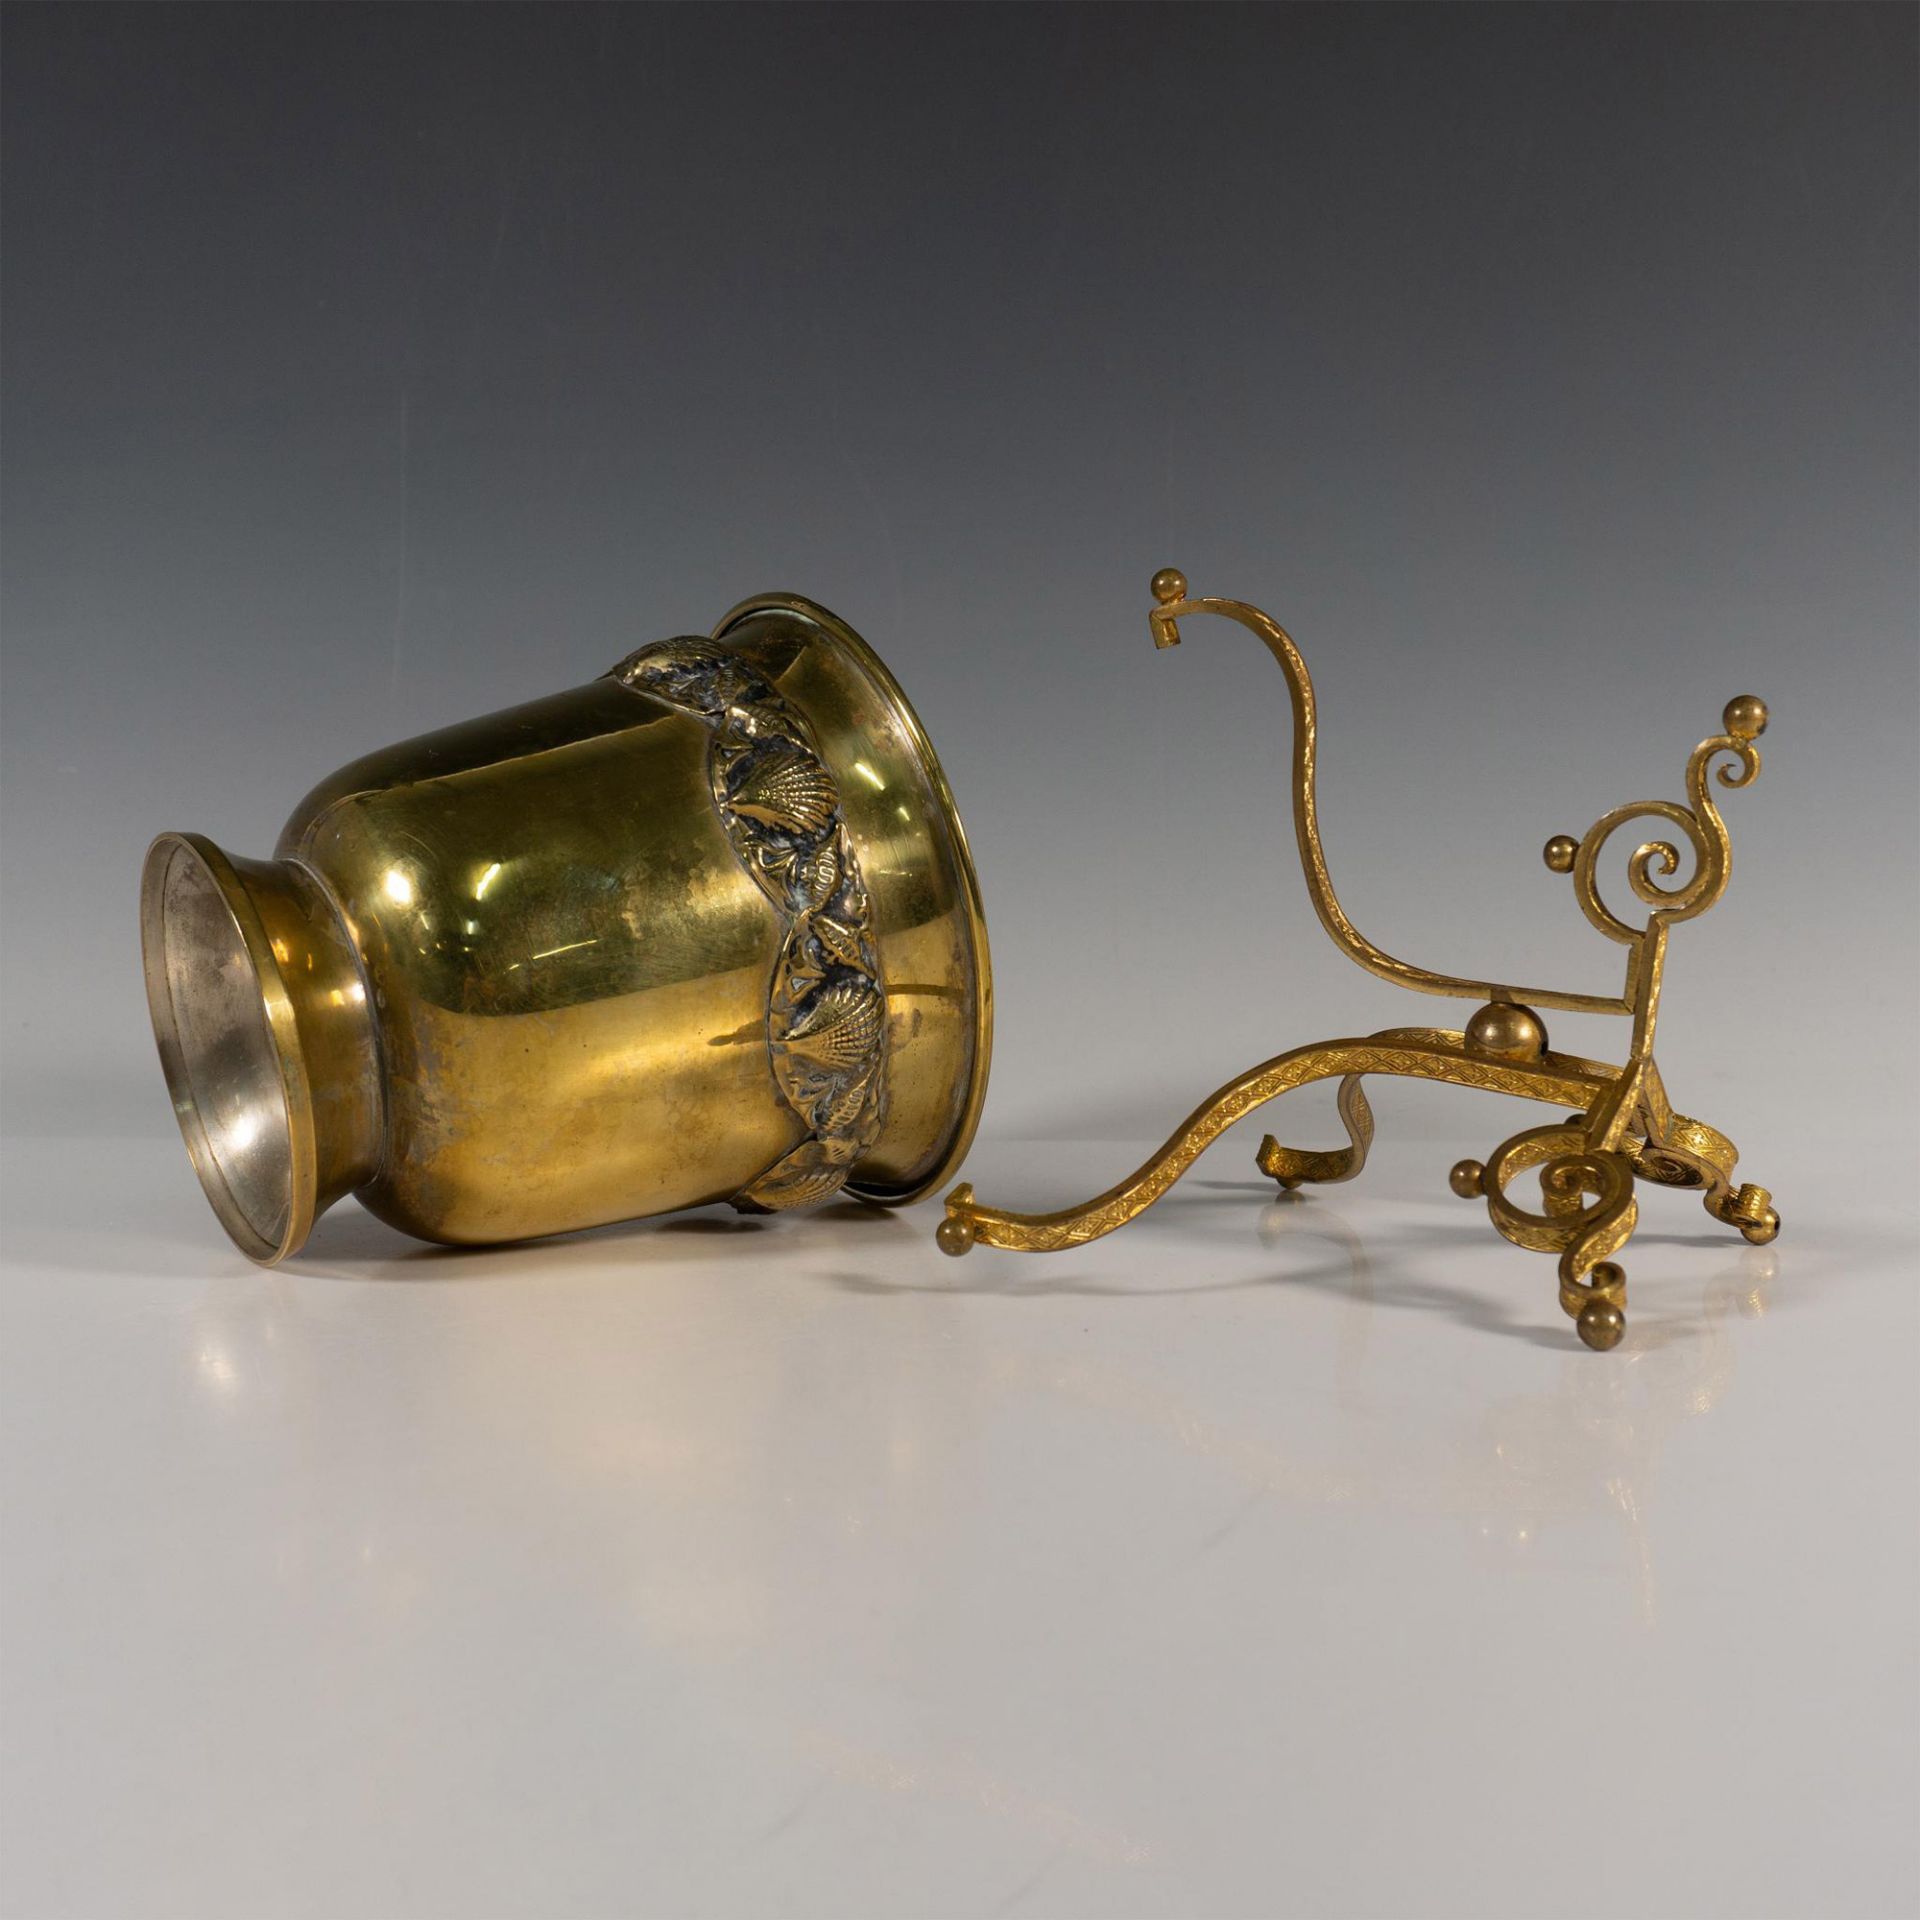 Decorative Brass Bowl with Marine Designs & Candle Holder - Image 3 of 5